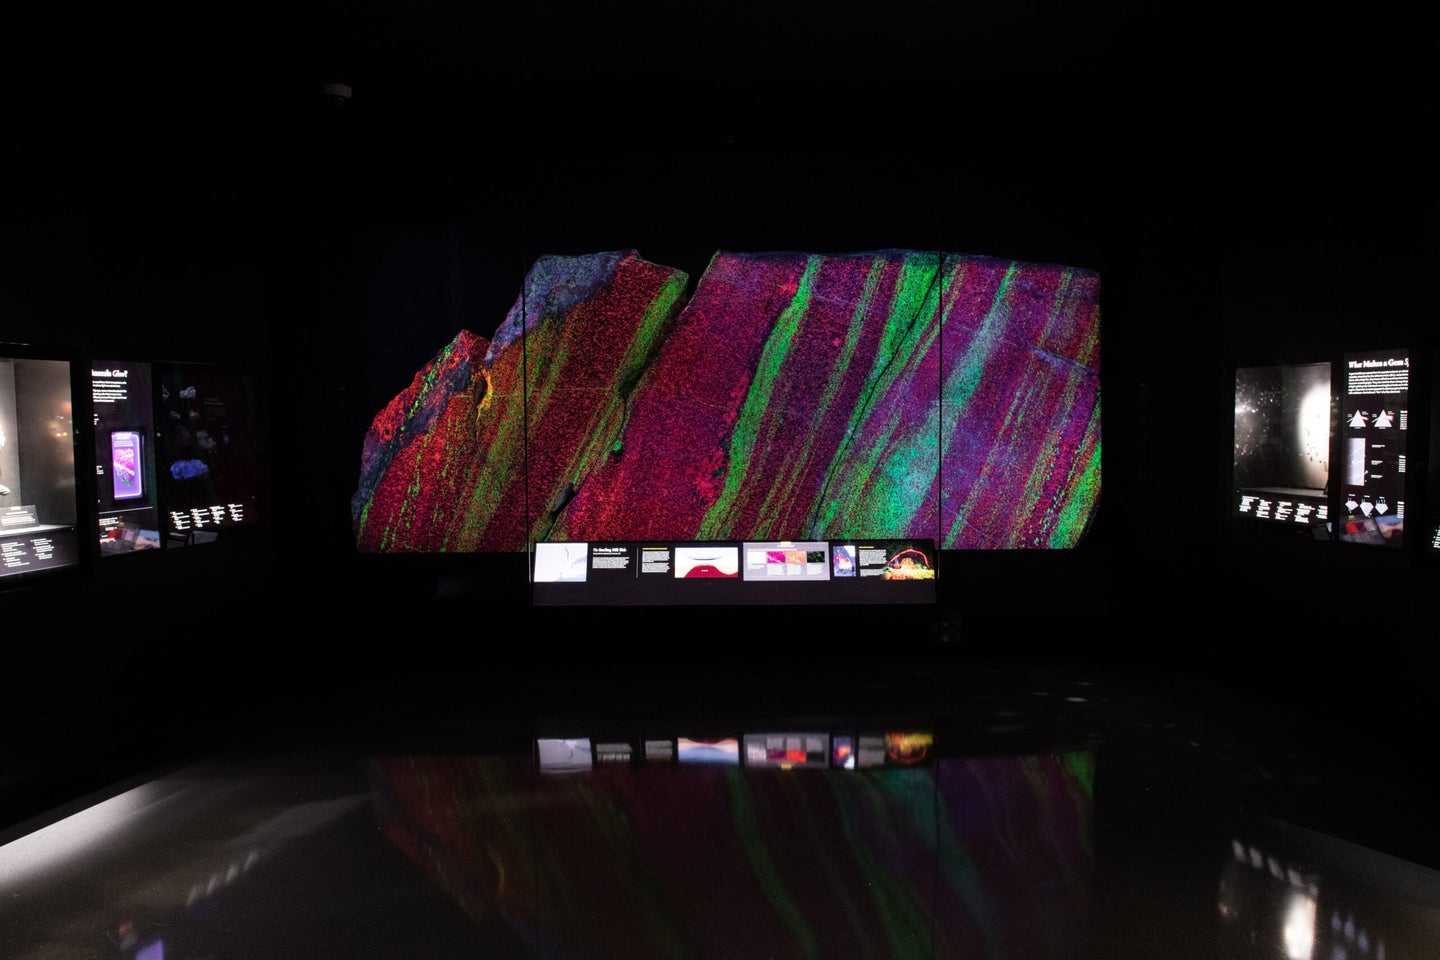 A large piece of granite rock glows in bright green and crimson red stripes behind glass and against the dark background of a museum exhibit. A few illegible, backlit display signs surround the large rock.